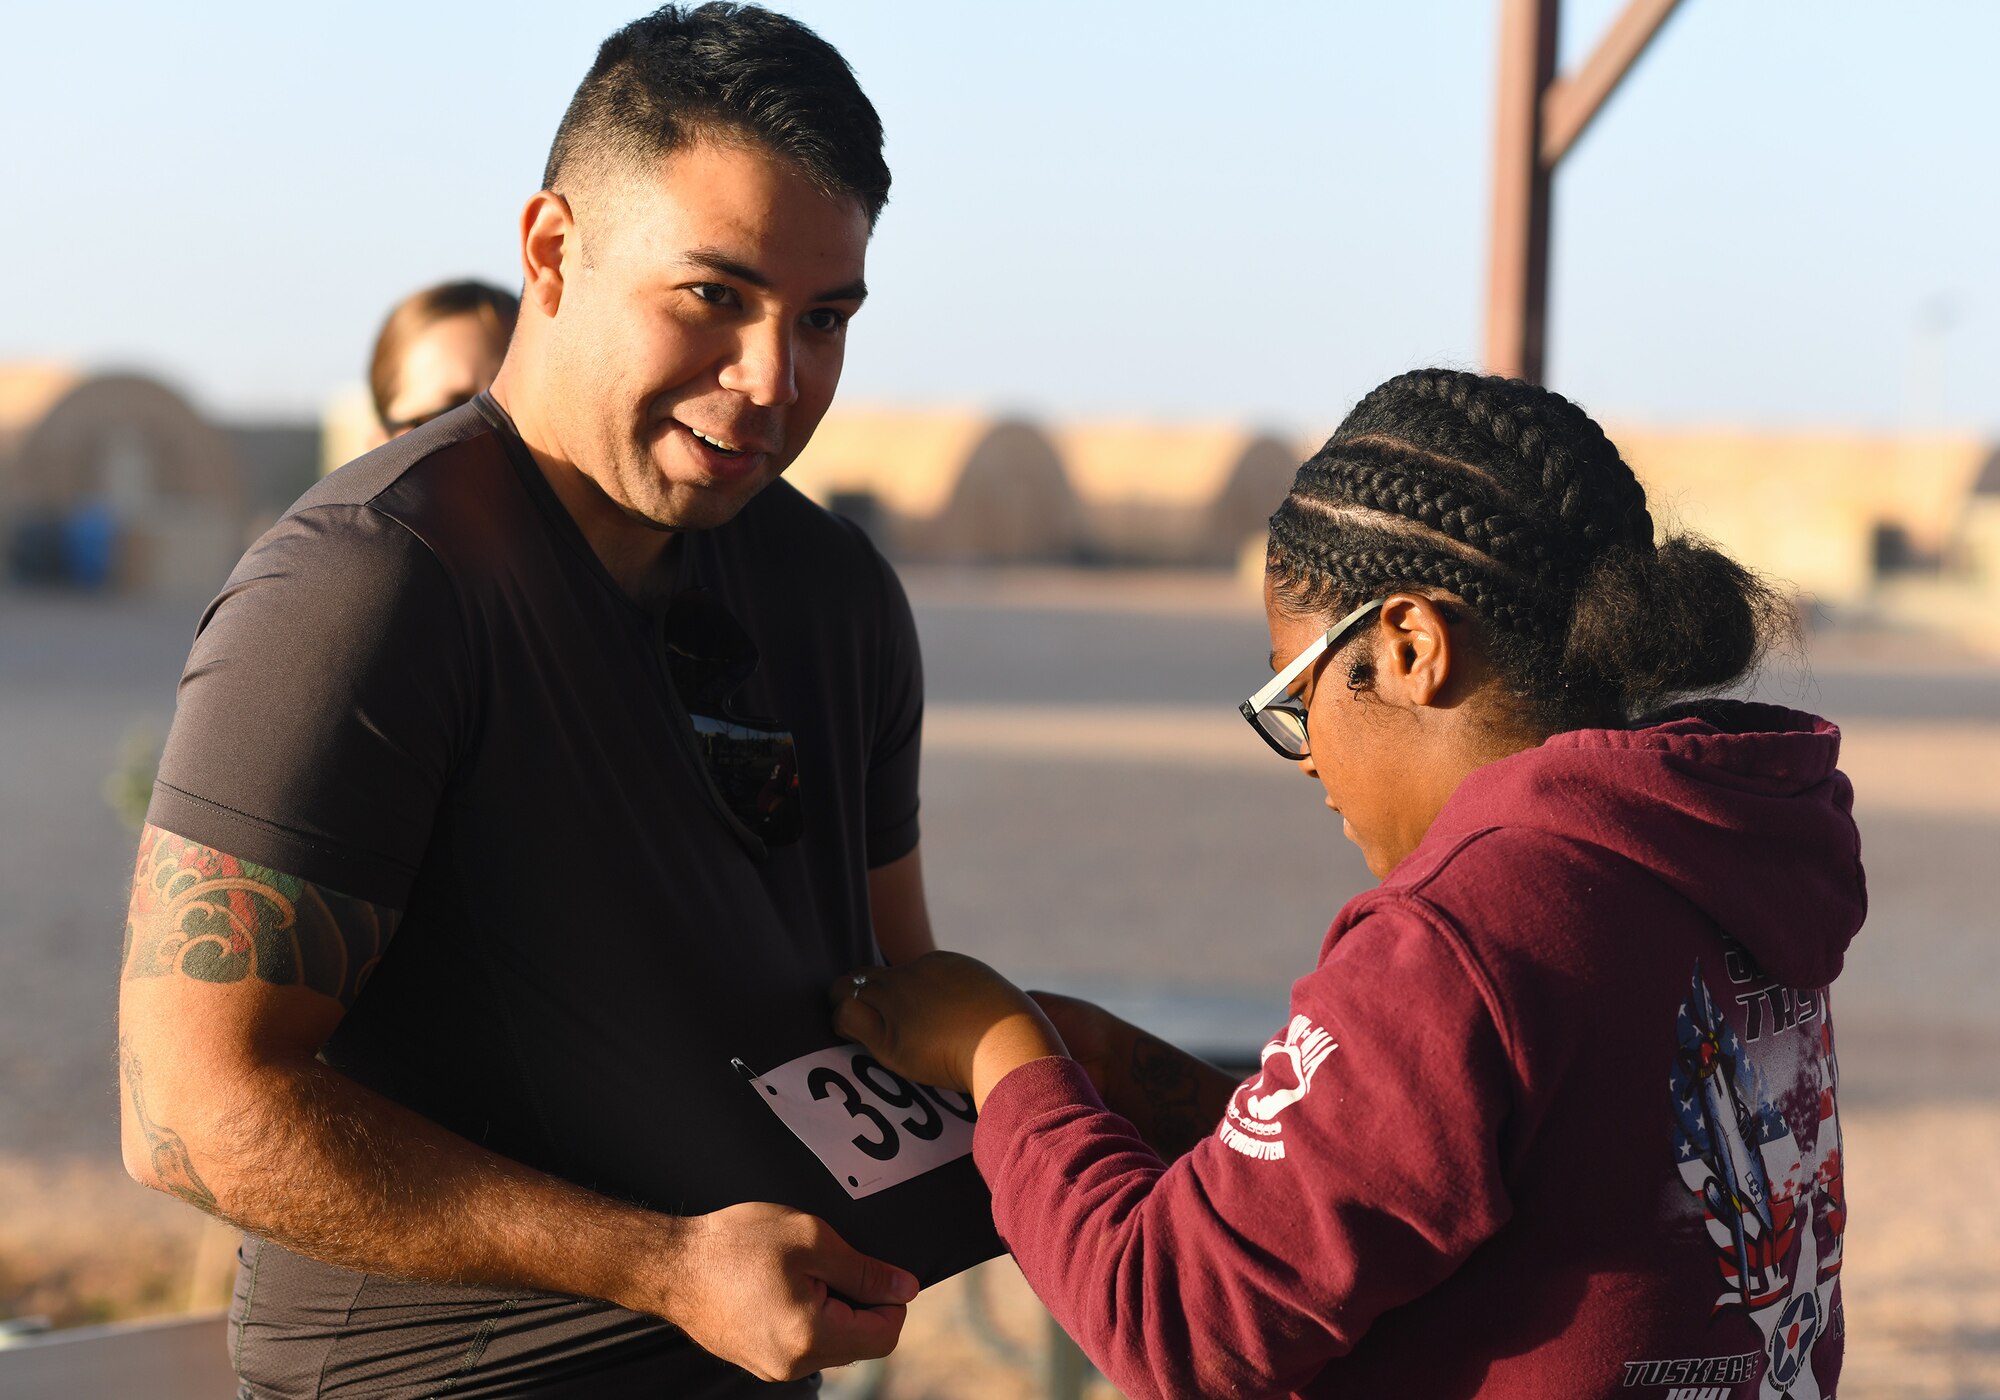 A color run participant receives his number from an event coordinator at Nigerien Air Base 201, Niger, Feb. 2, 2020. More than 30 runners and volunteers participated in the event. (U.S. Air Force photo by Tech. Sgt. Alex Fox Echols III)